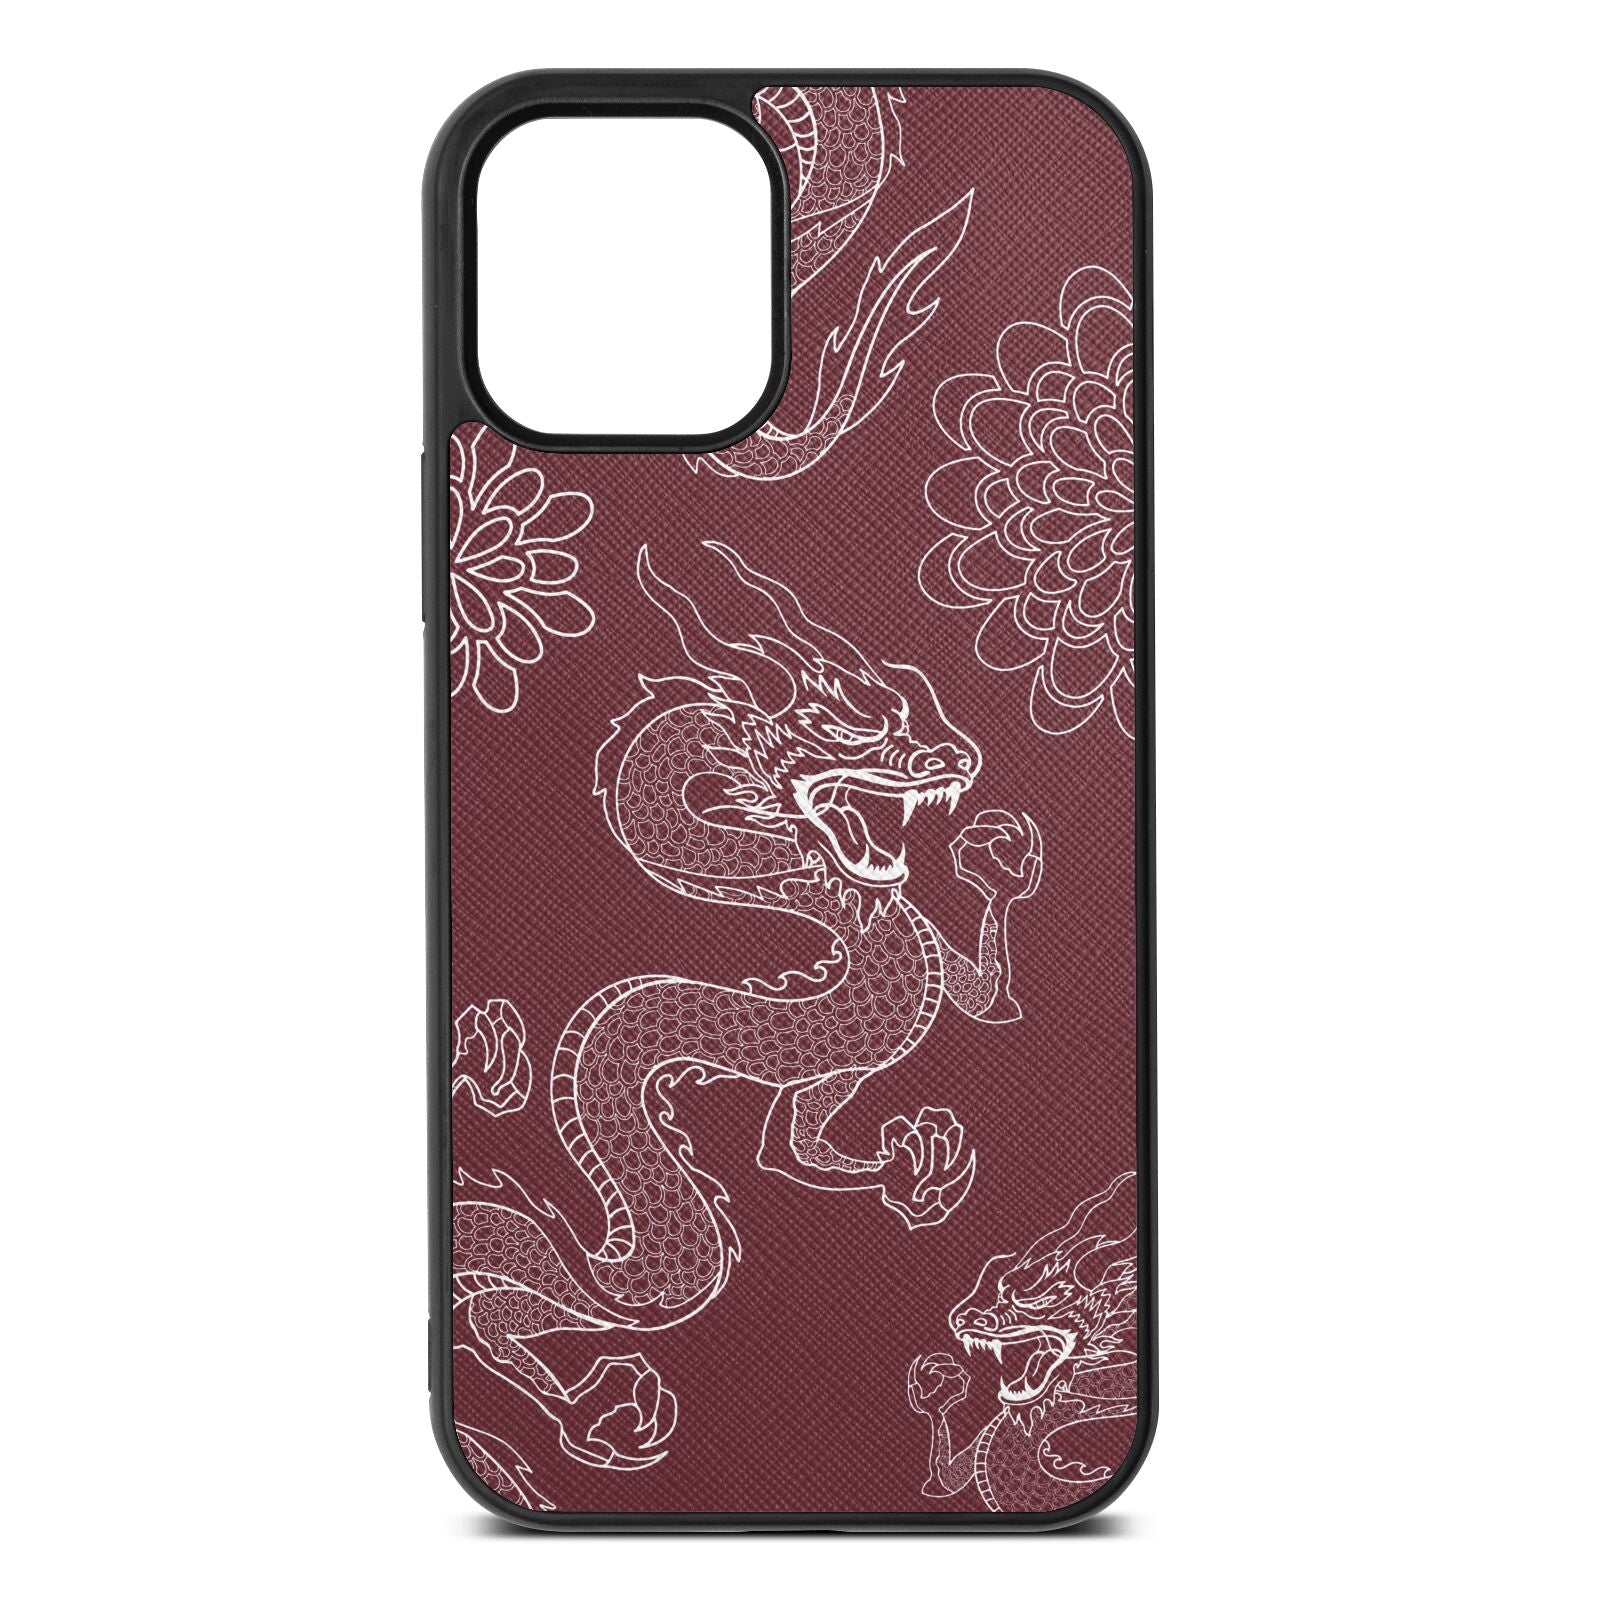 Dragons Rose Brown Saffiano Leather iPhone 12 Case